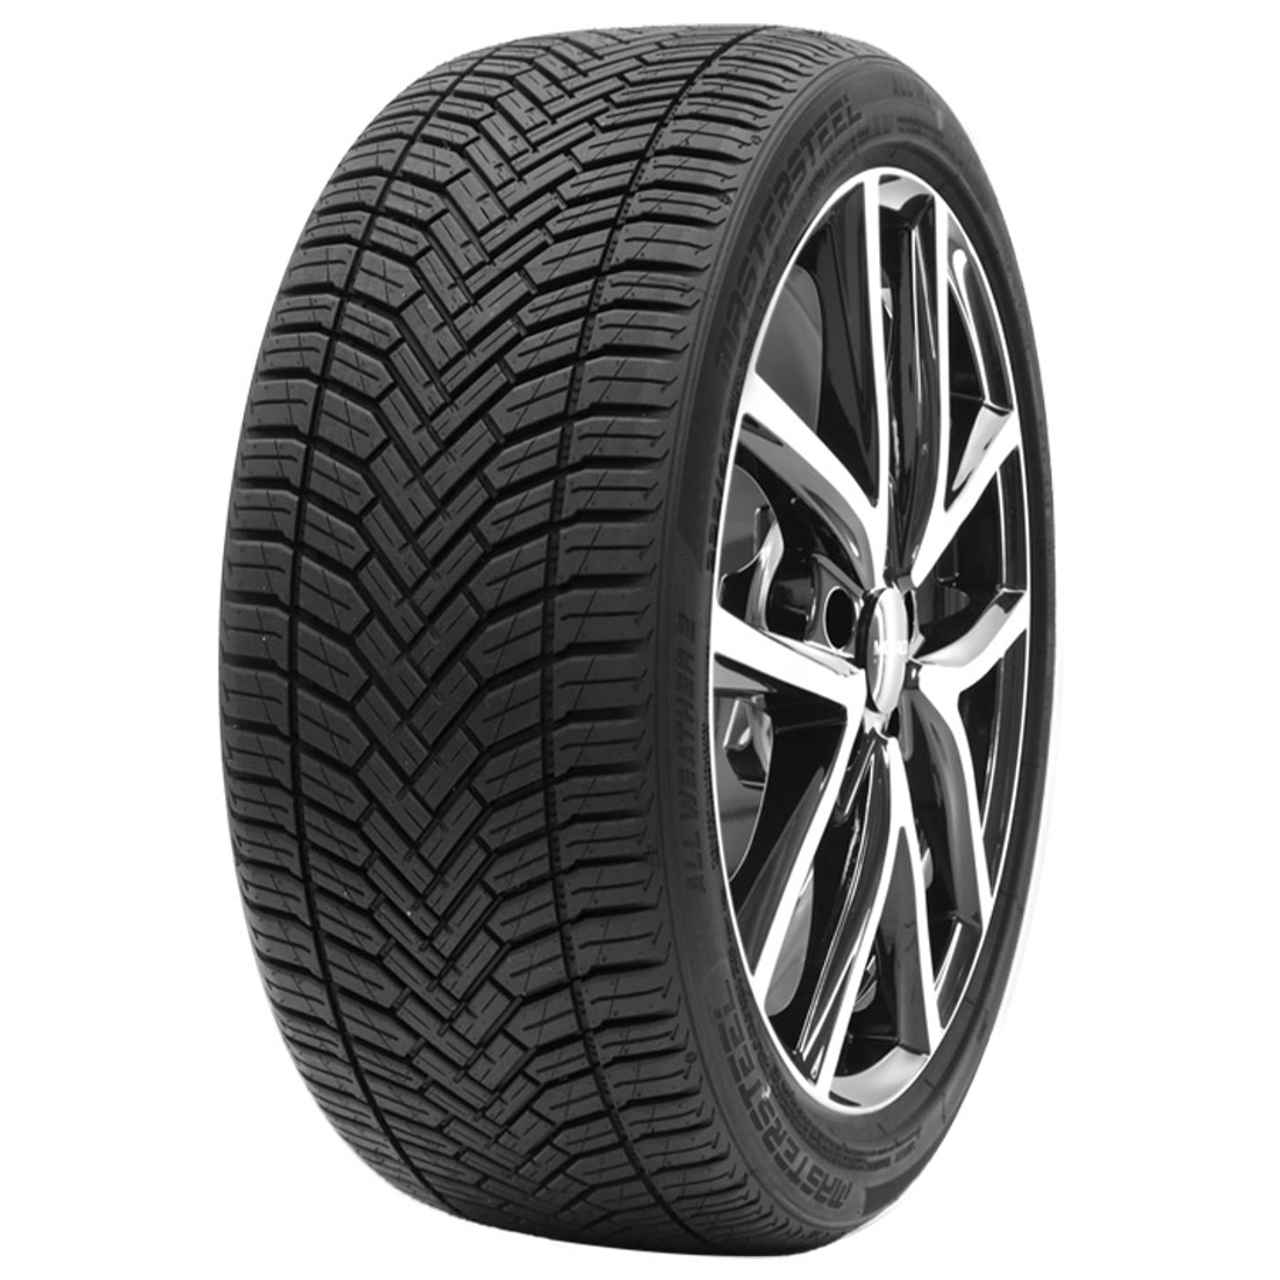 MASTERSTEEL ALL WEATHER 2 155/65R14 75T BSW